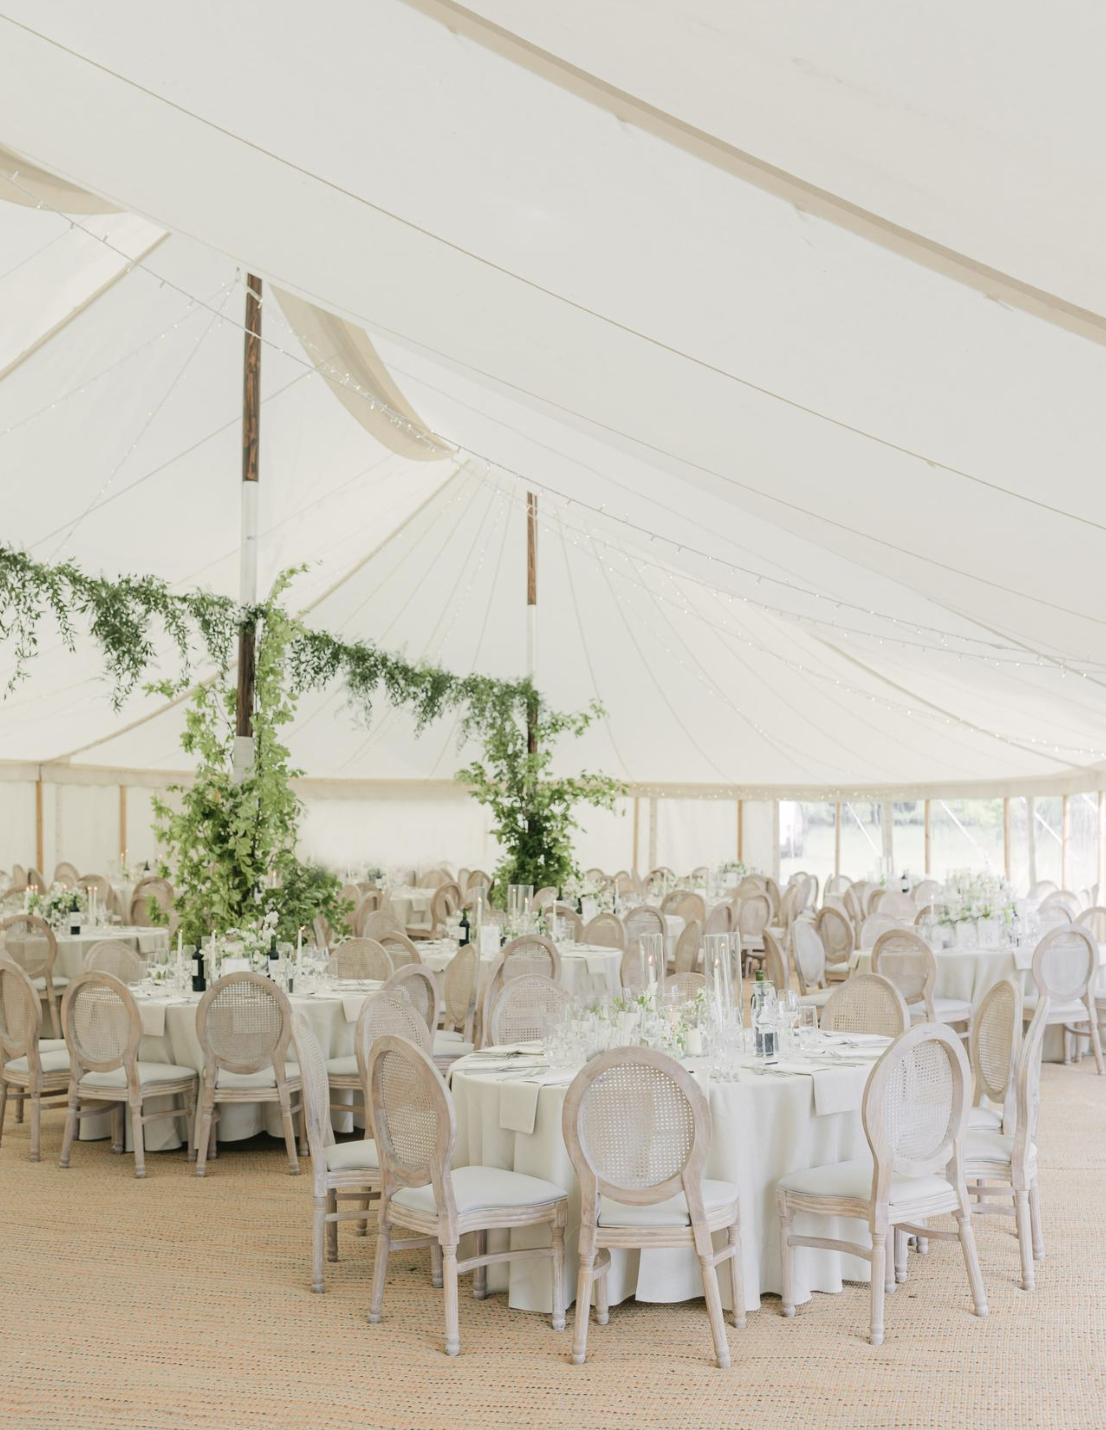 Pink-Champagne-Designs-Garden-wedding-reception-tent-and-greenery-inspiration